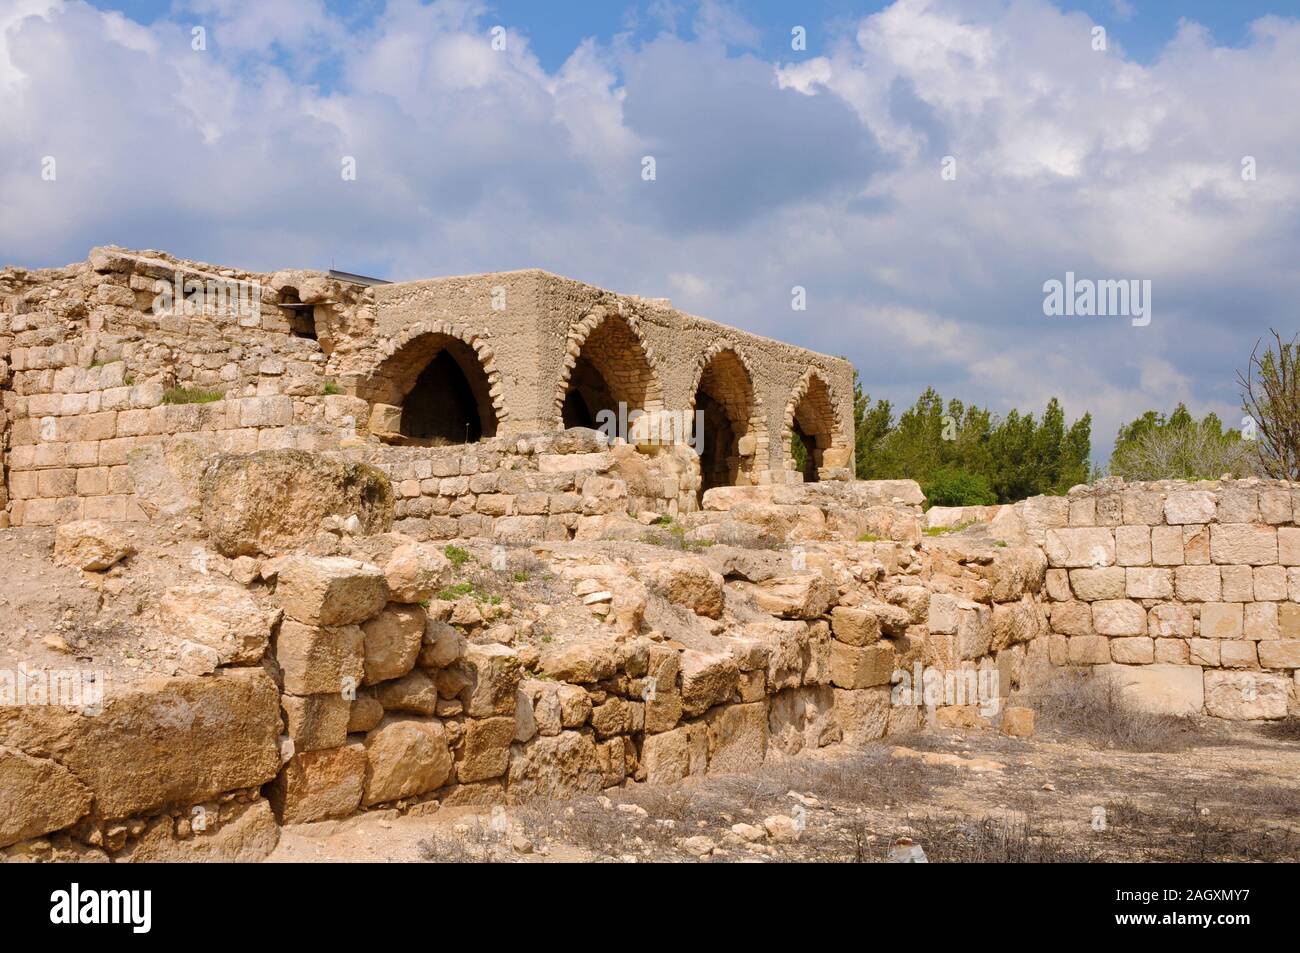 Crusader Ruins in Beit Guvrin National monument, Israel Stock Photo